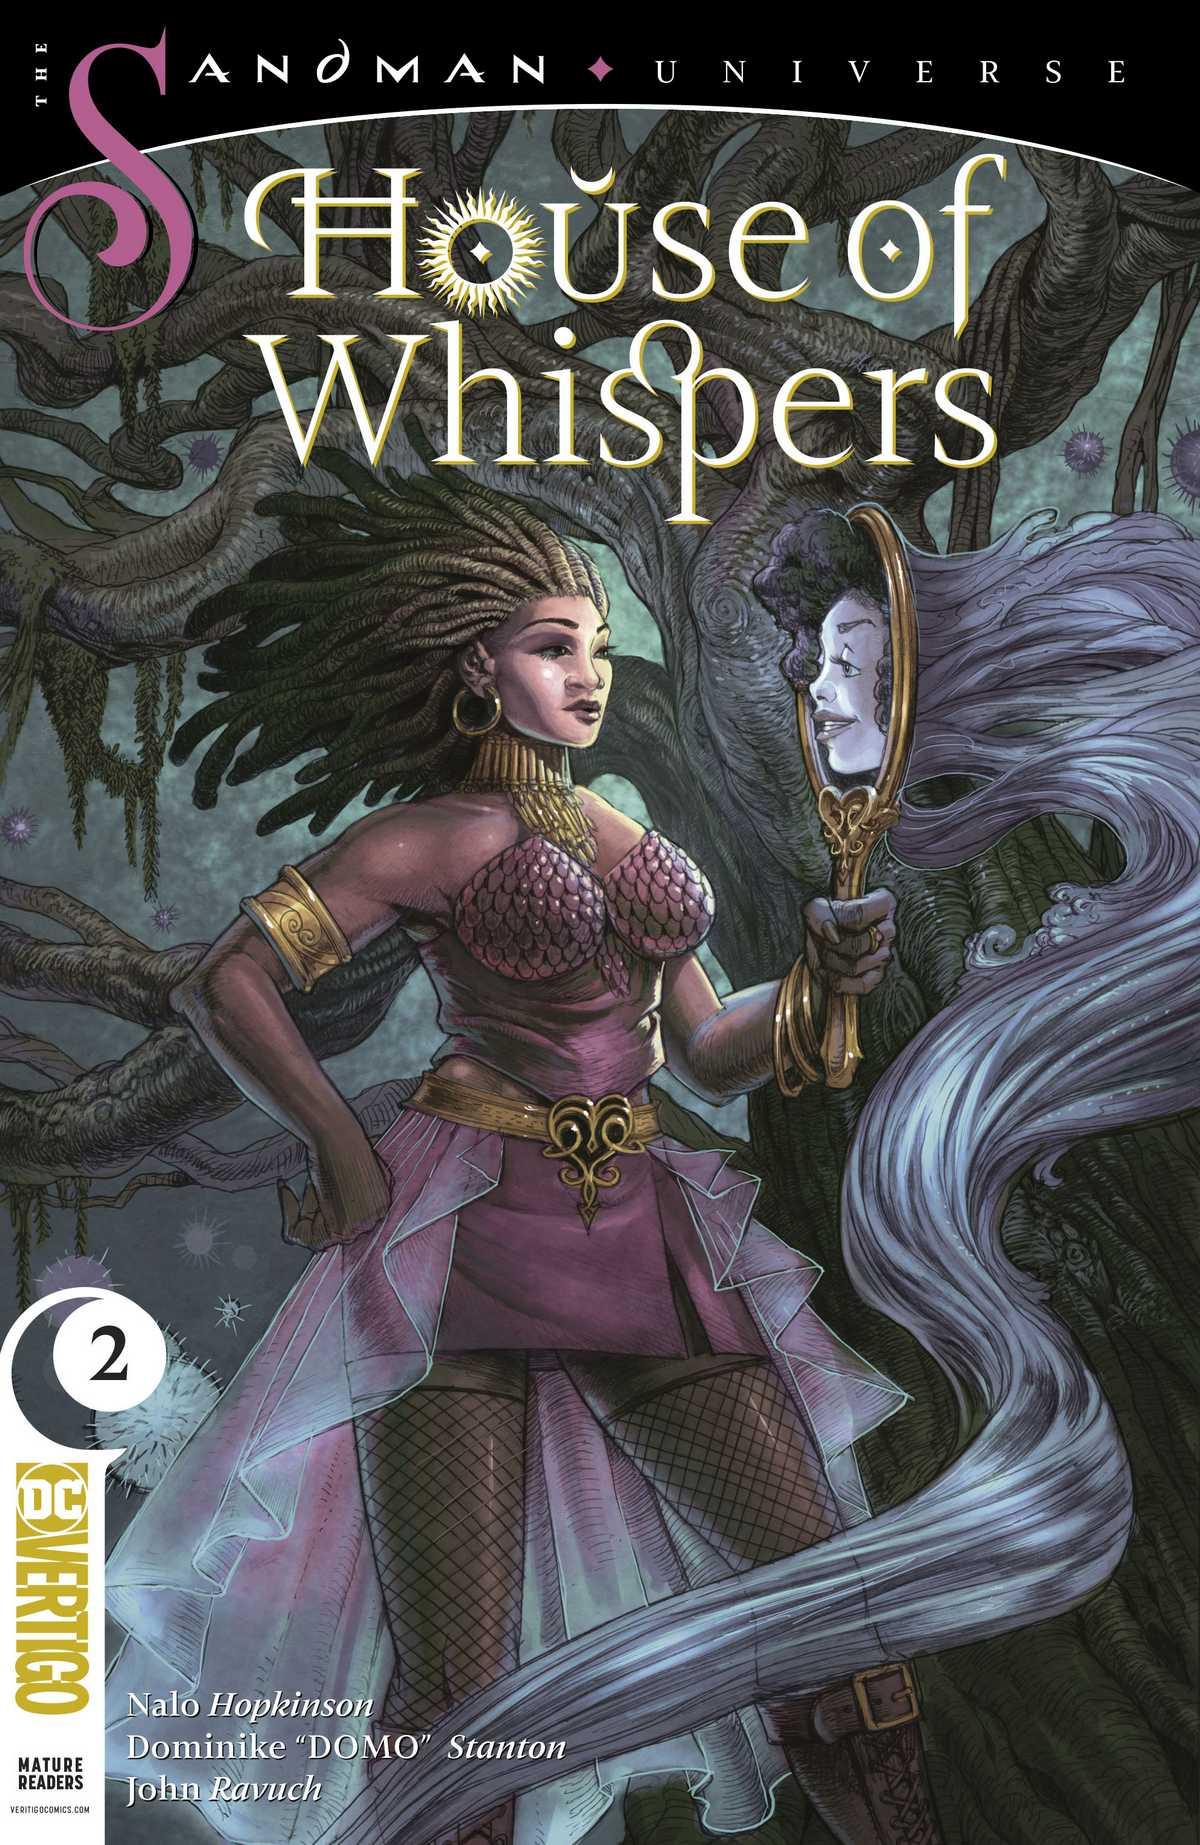 House of Whispers Vol. 1 #2